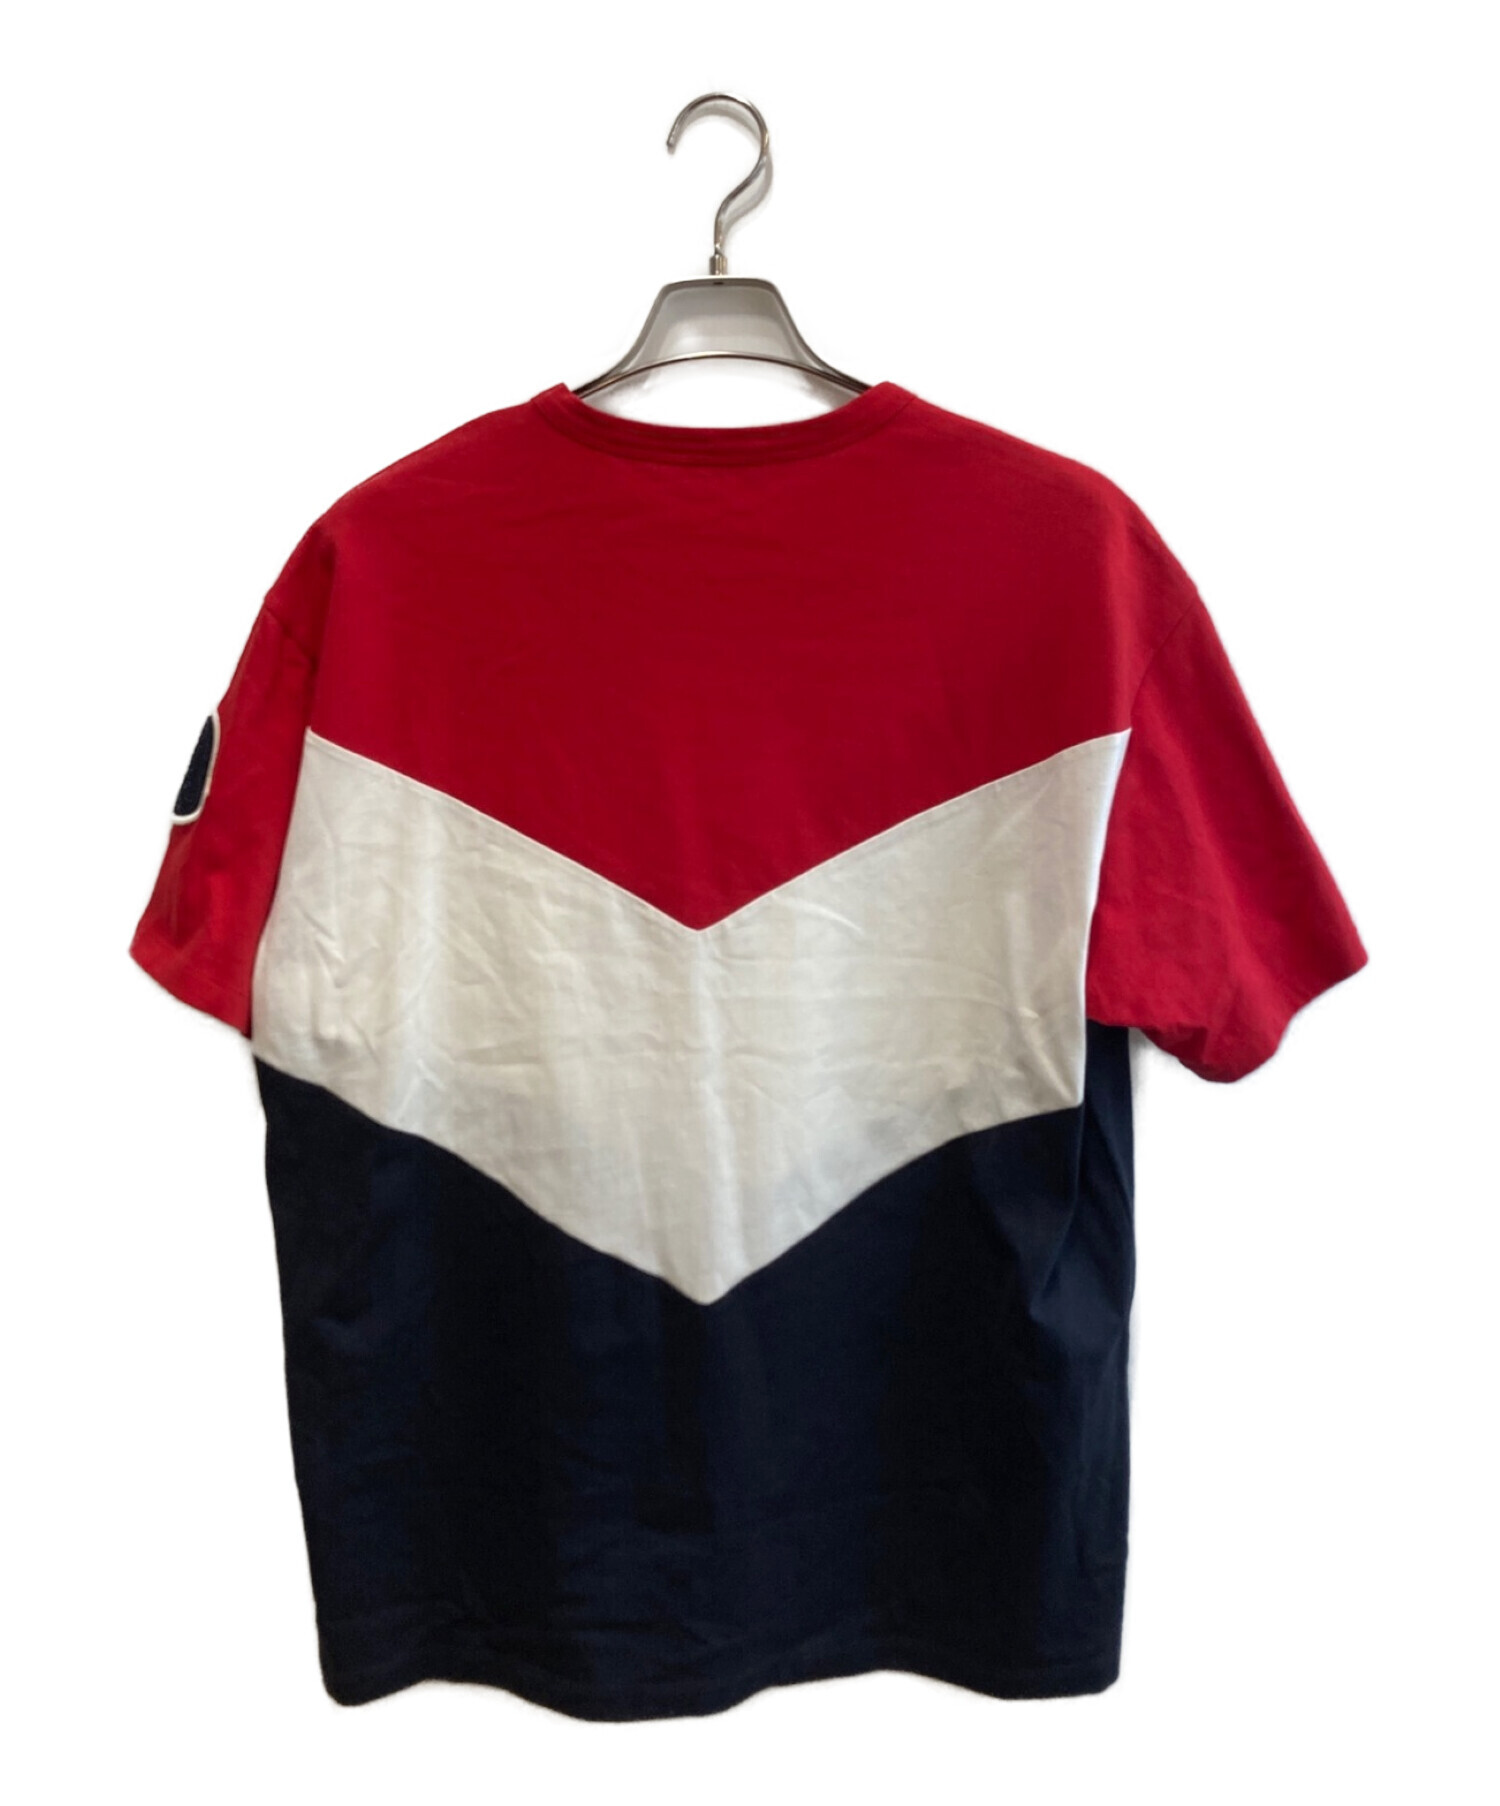 MONCLER MAGLIA T-SHIRT モンクレール ボーダー Tシャツ国内正規店